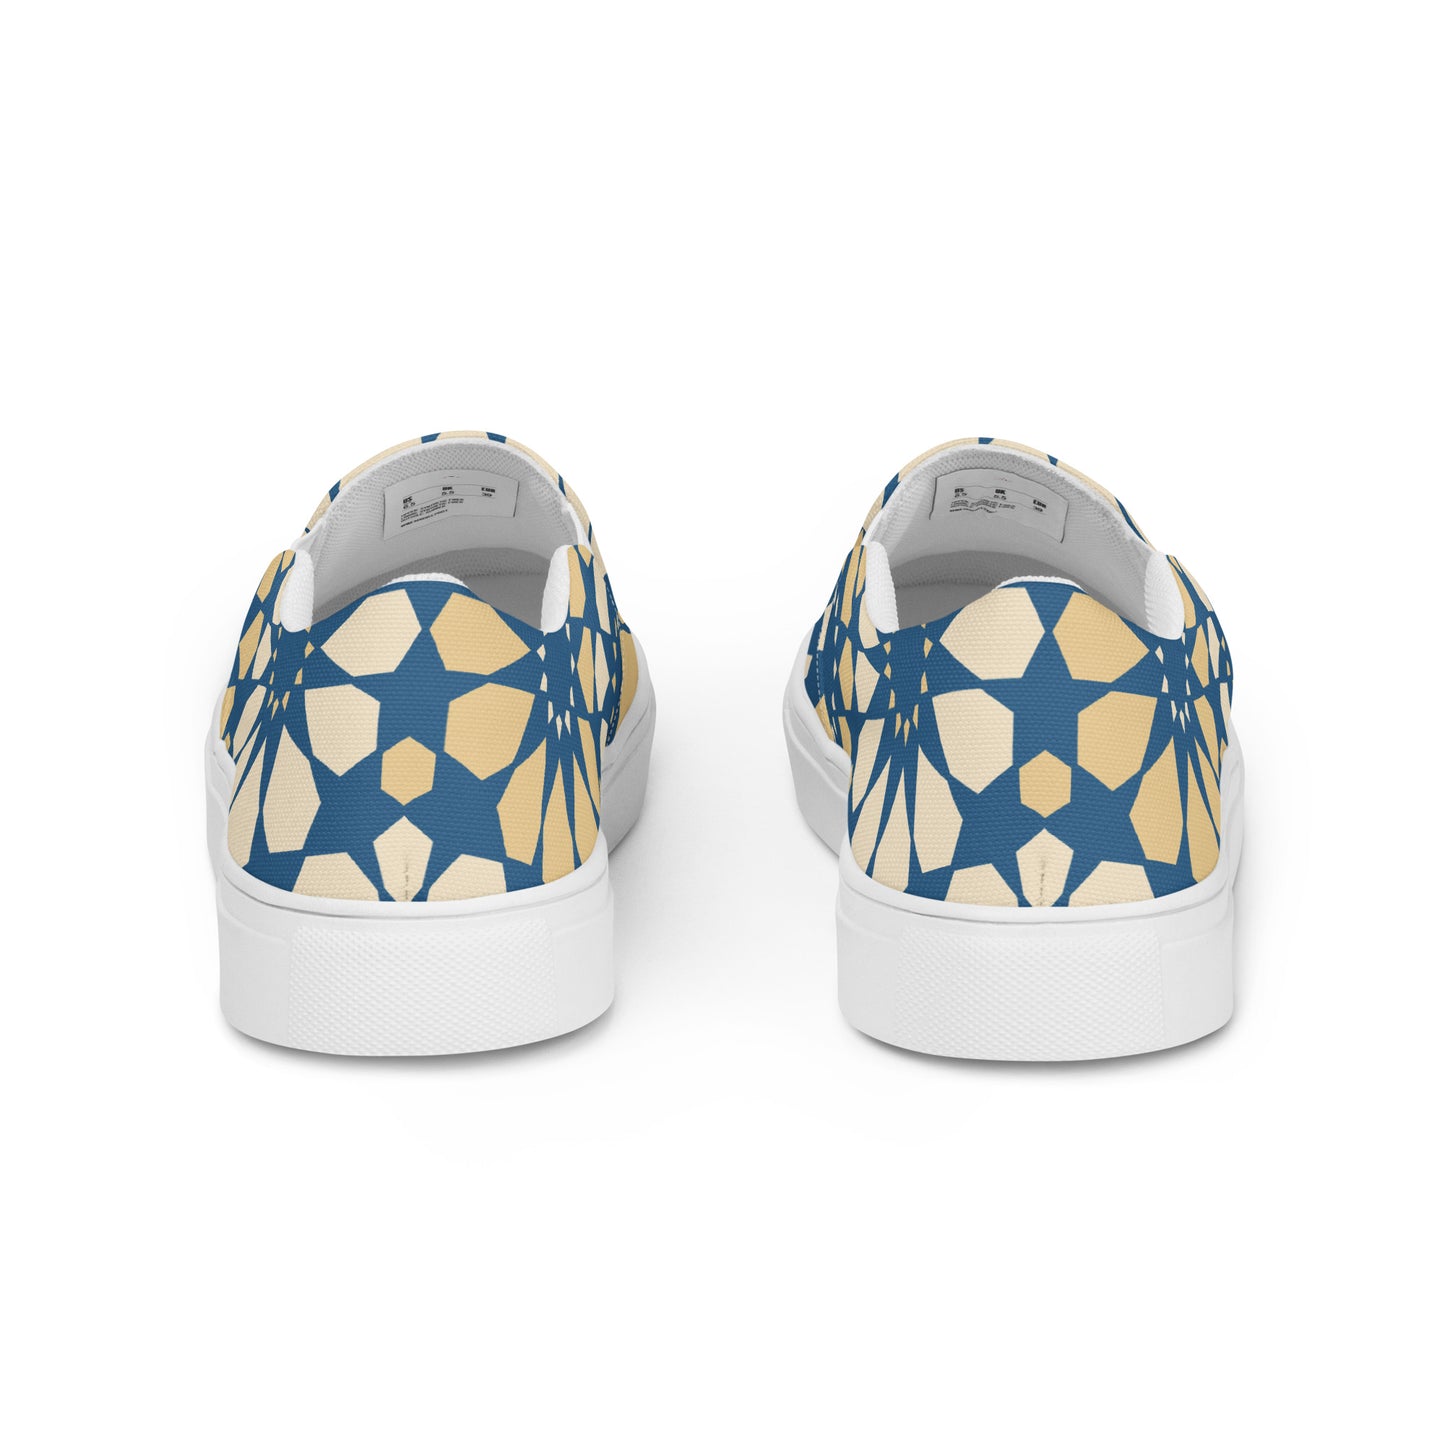 Women’s slip-on canvas shoes, made for comfort and stylist. Part of the sunflower collection